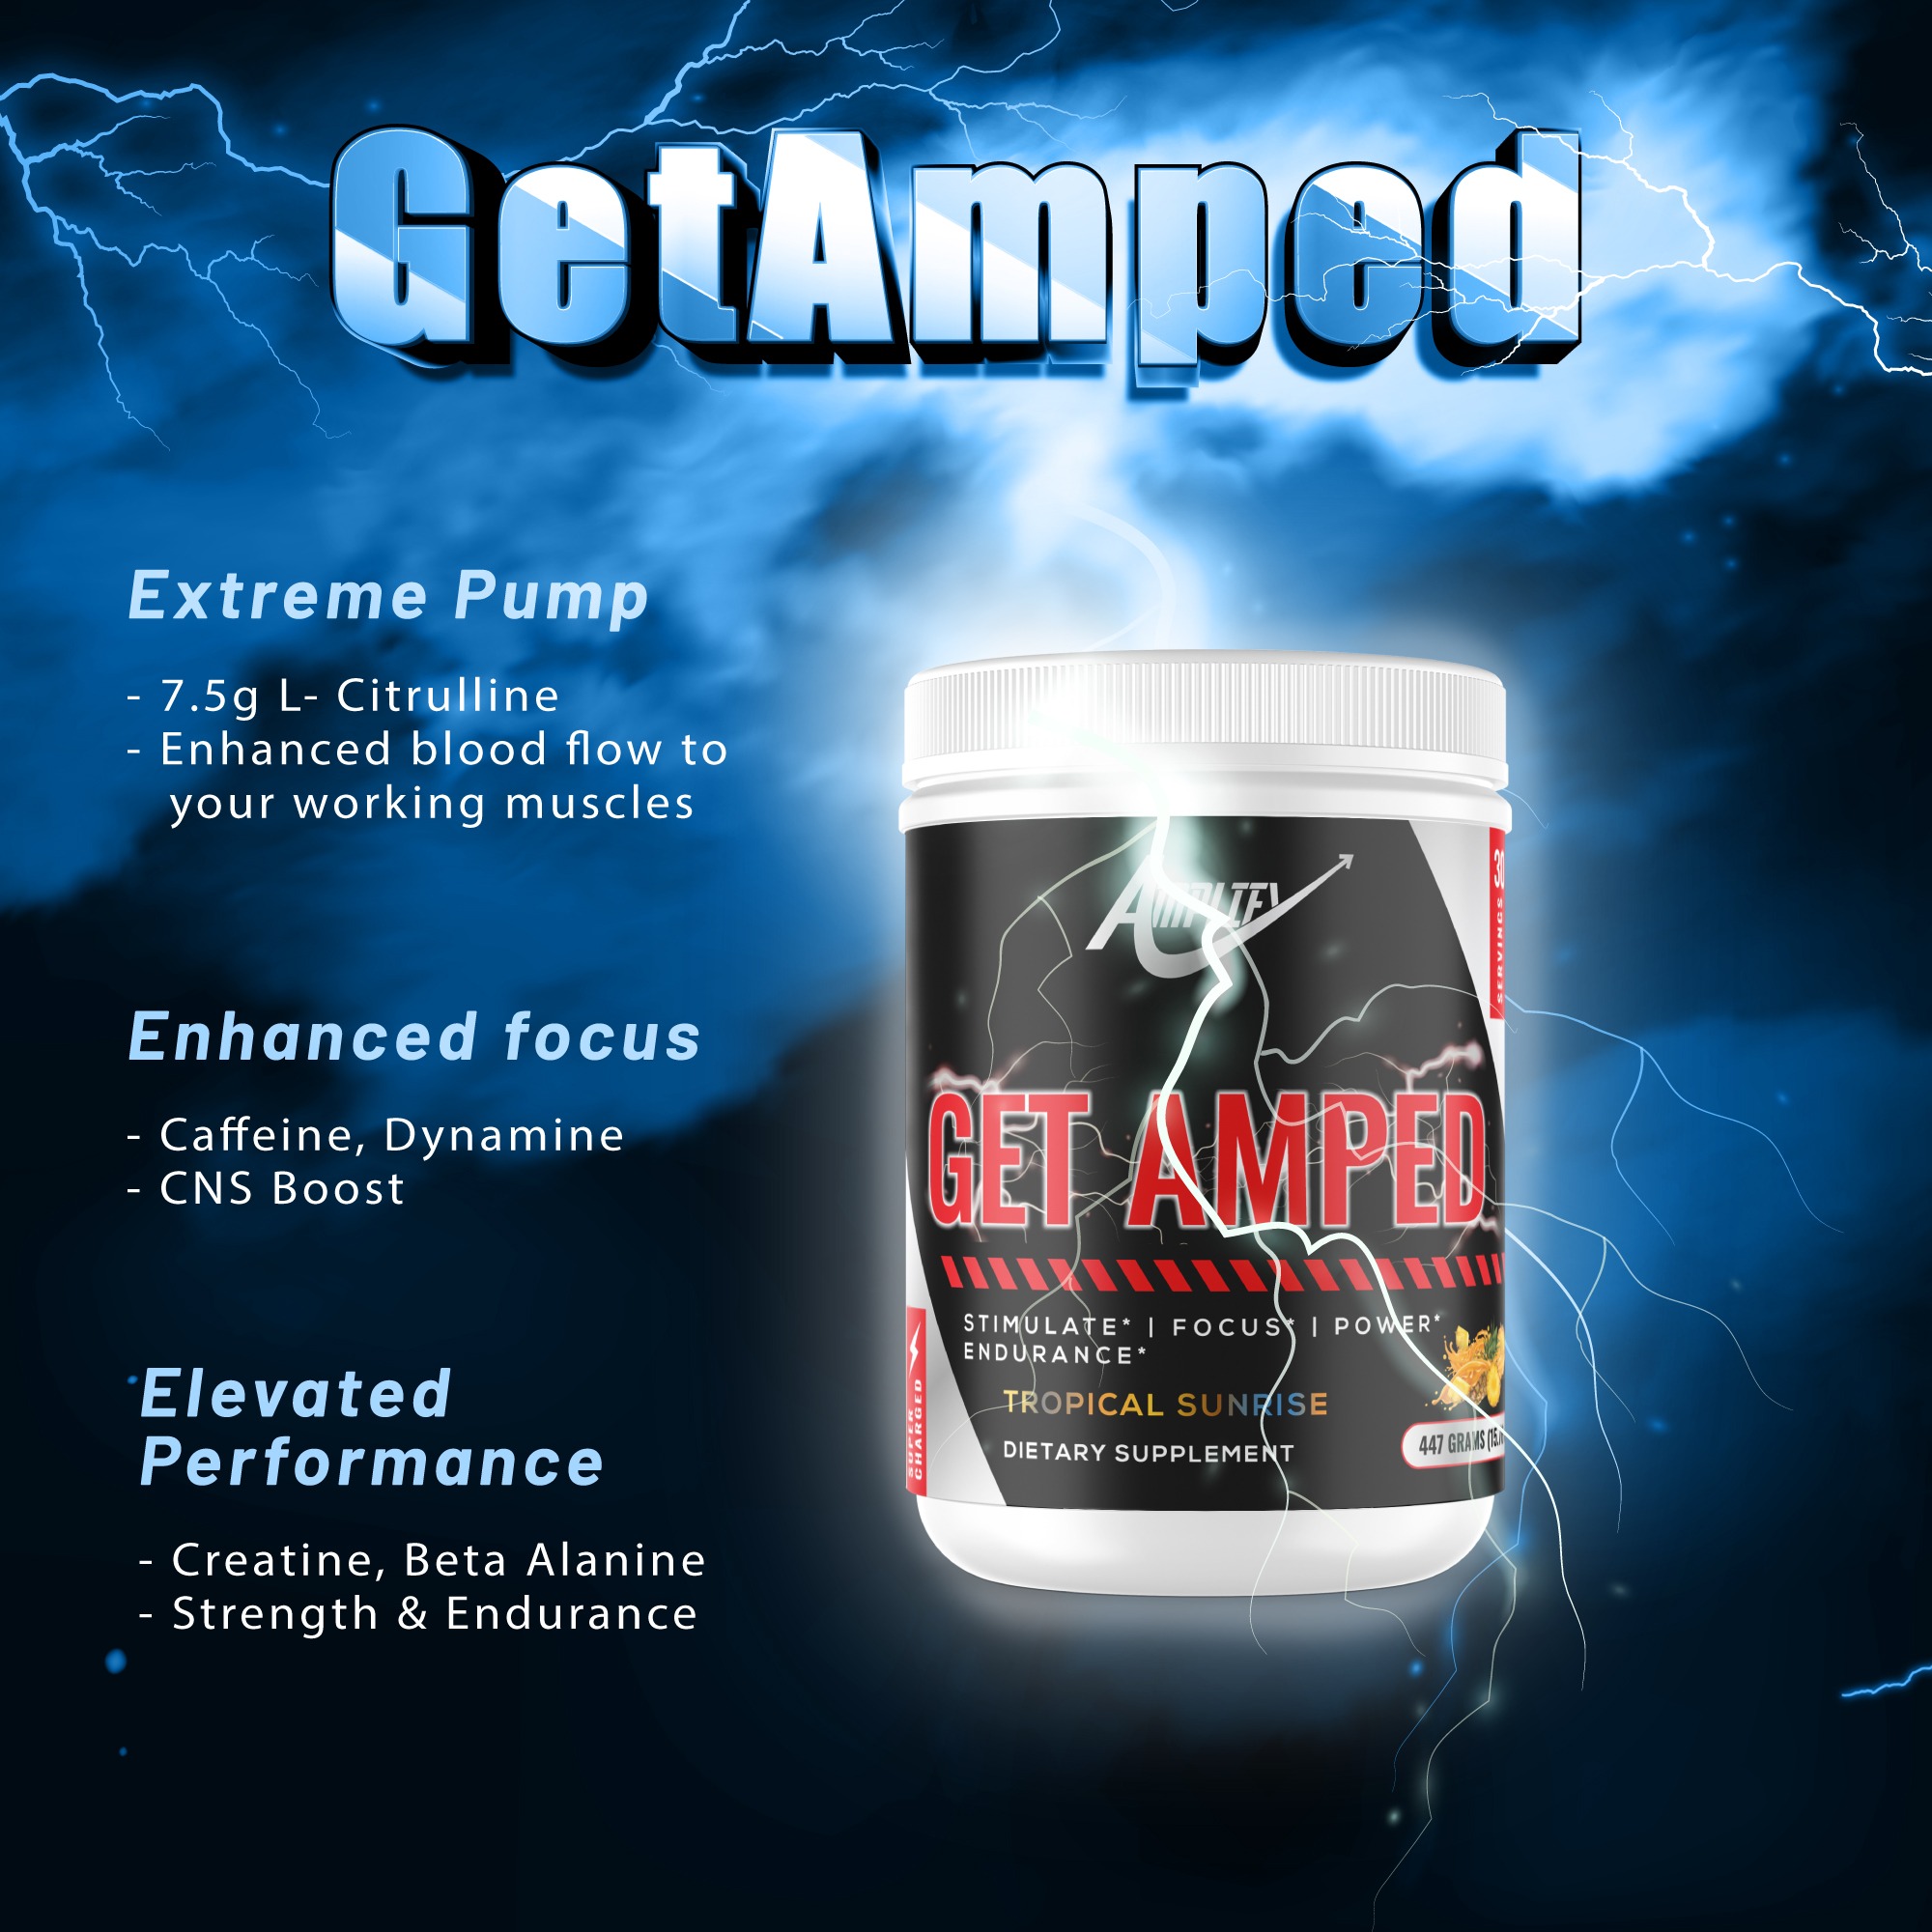 - Extreme Pump - 7.5g L- Citrulline - Enhanced blood flow to your working muscles - Enhanced focus - Caffeine, Dynamine - CNS Boost - Improved Performance - Creatine, Beta Alanine - Strength & Endurance